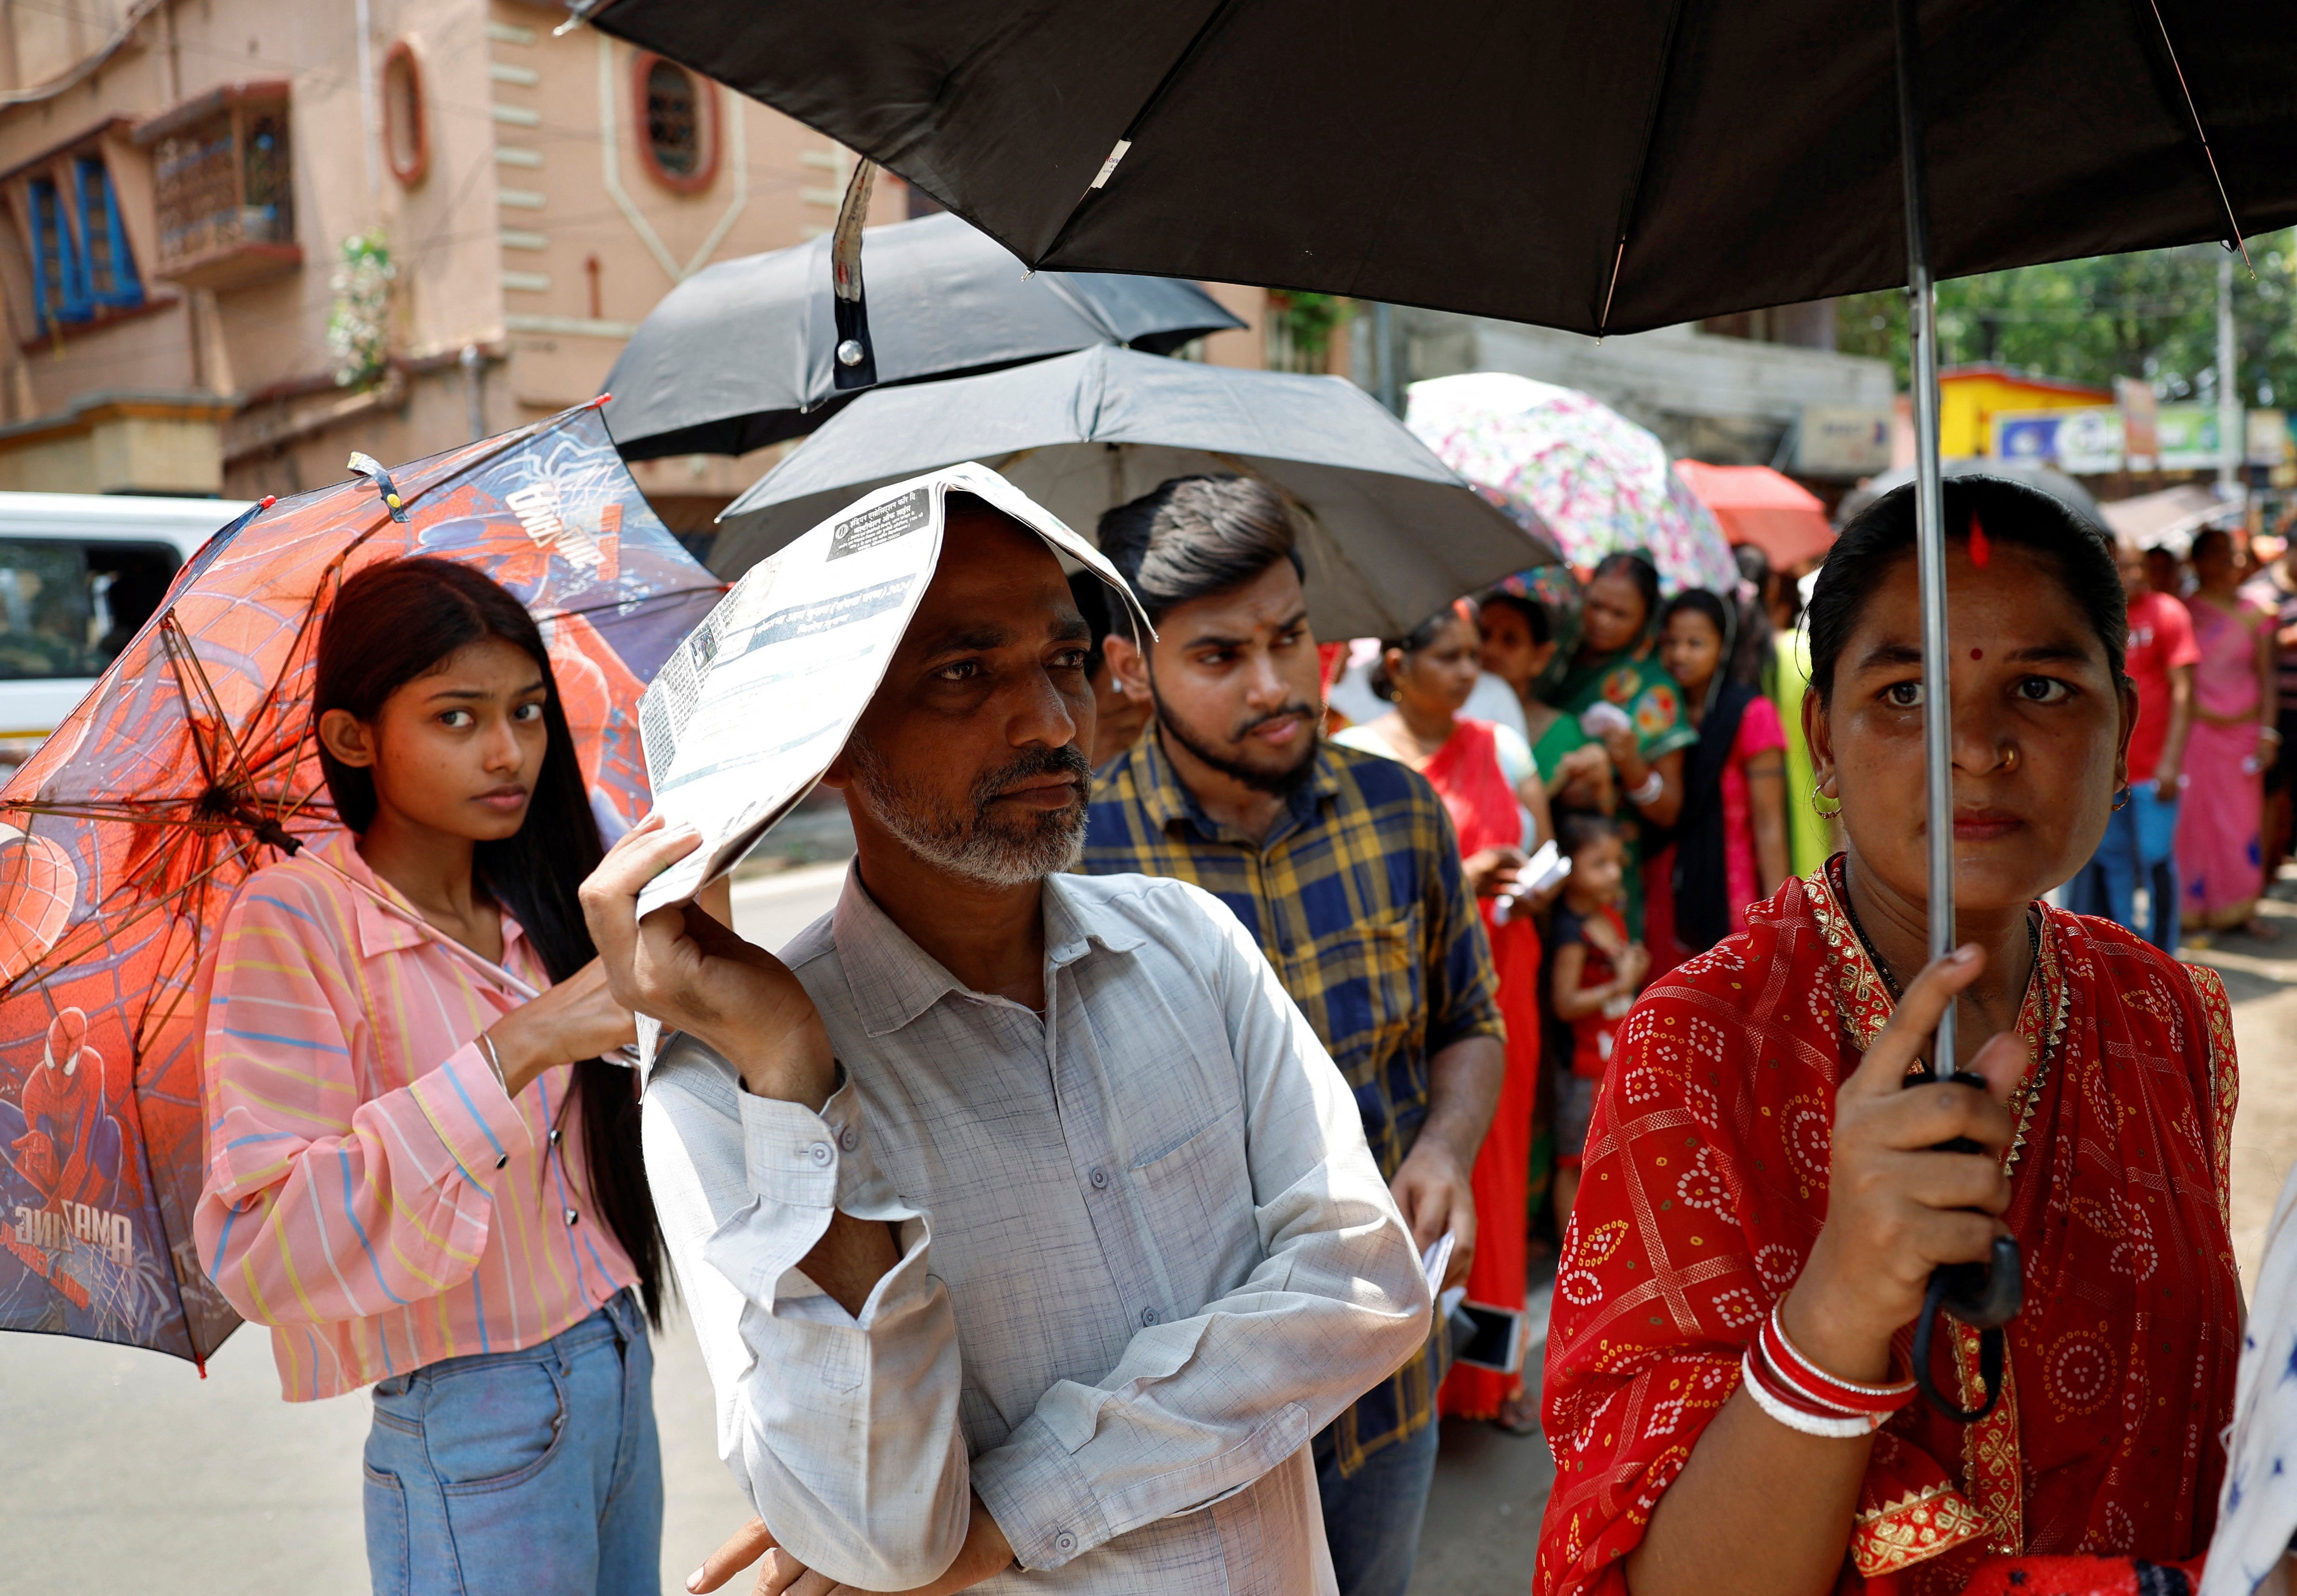 A man uses a newspaper as others use umbrellas to protect themselves from the heat as they wait to vote